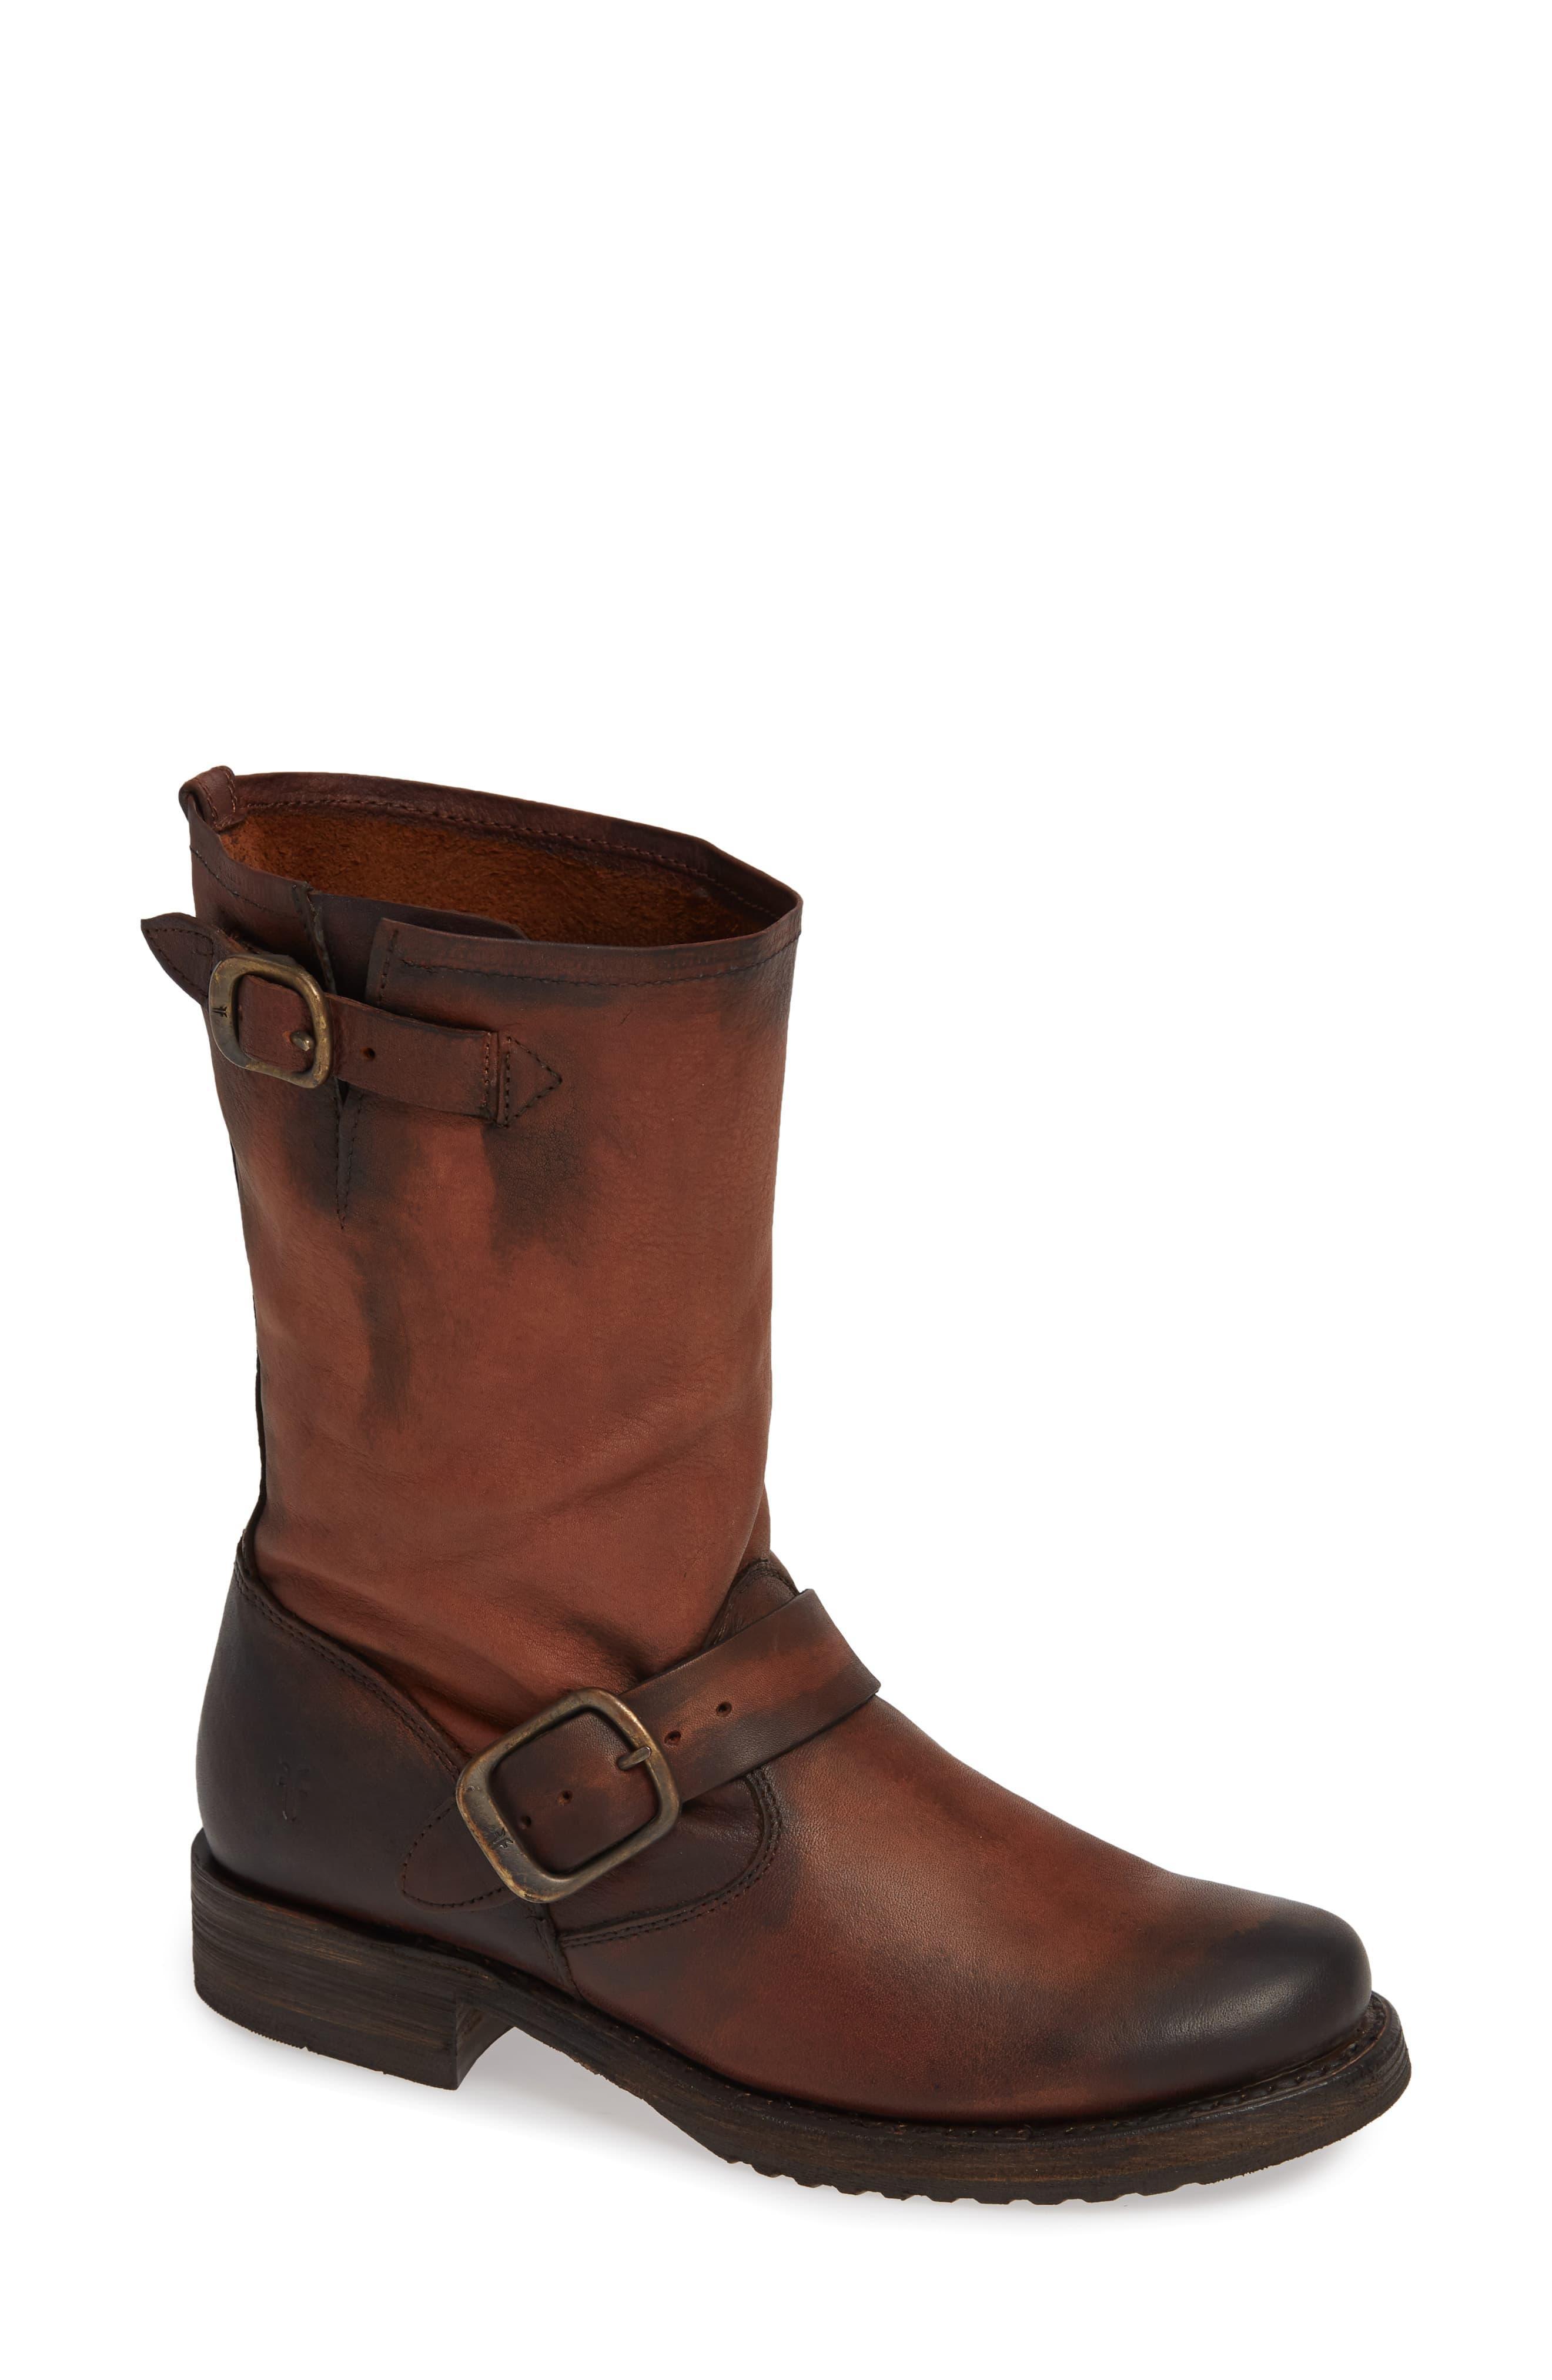 Frye Leather 'veronica' Short Boot in Brown - Lyst